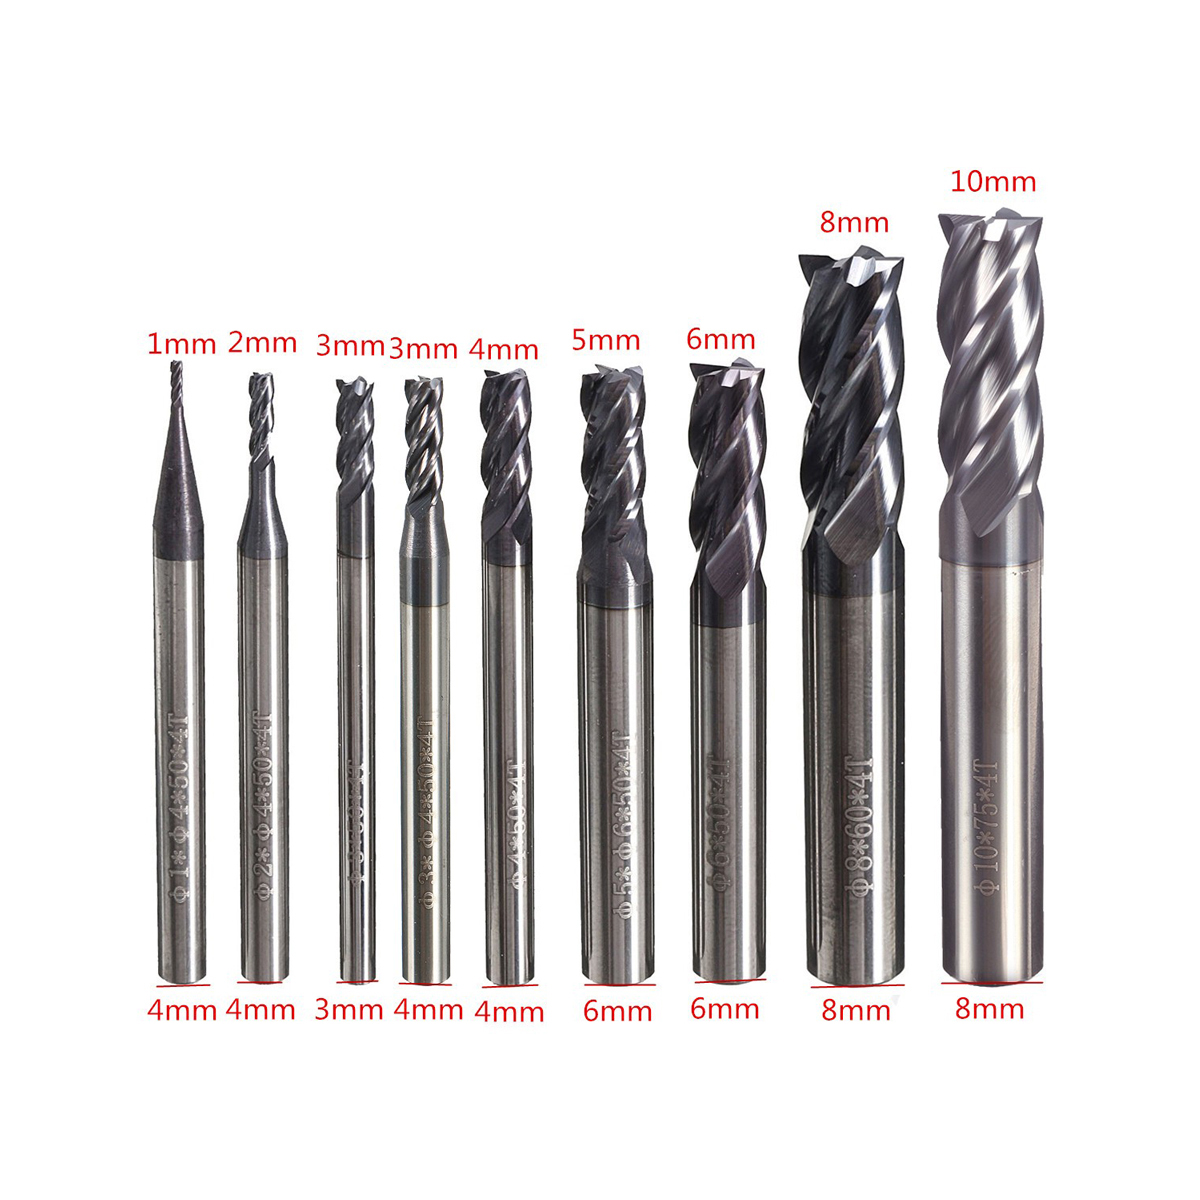 4 Fultes Milling Cutter,Tungsten End Milling Bits Tool 5 Pcs 4mm CNC Carbide End Mill Set 